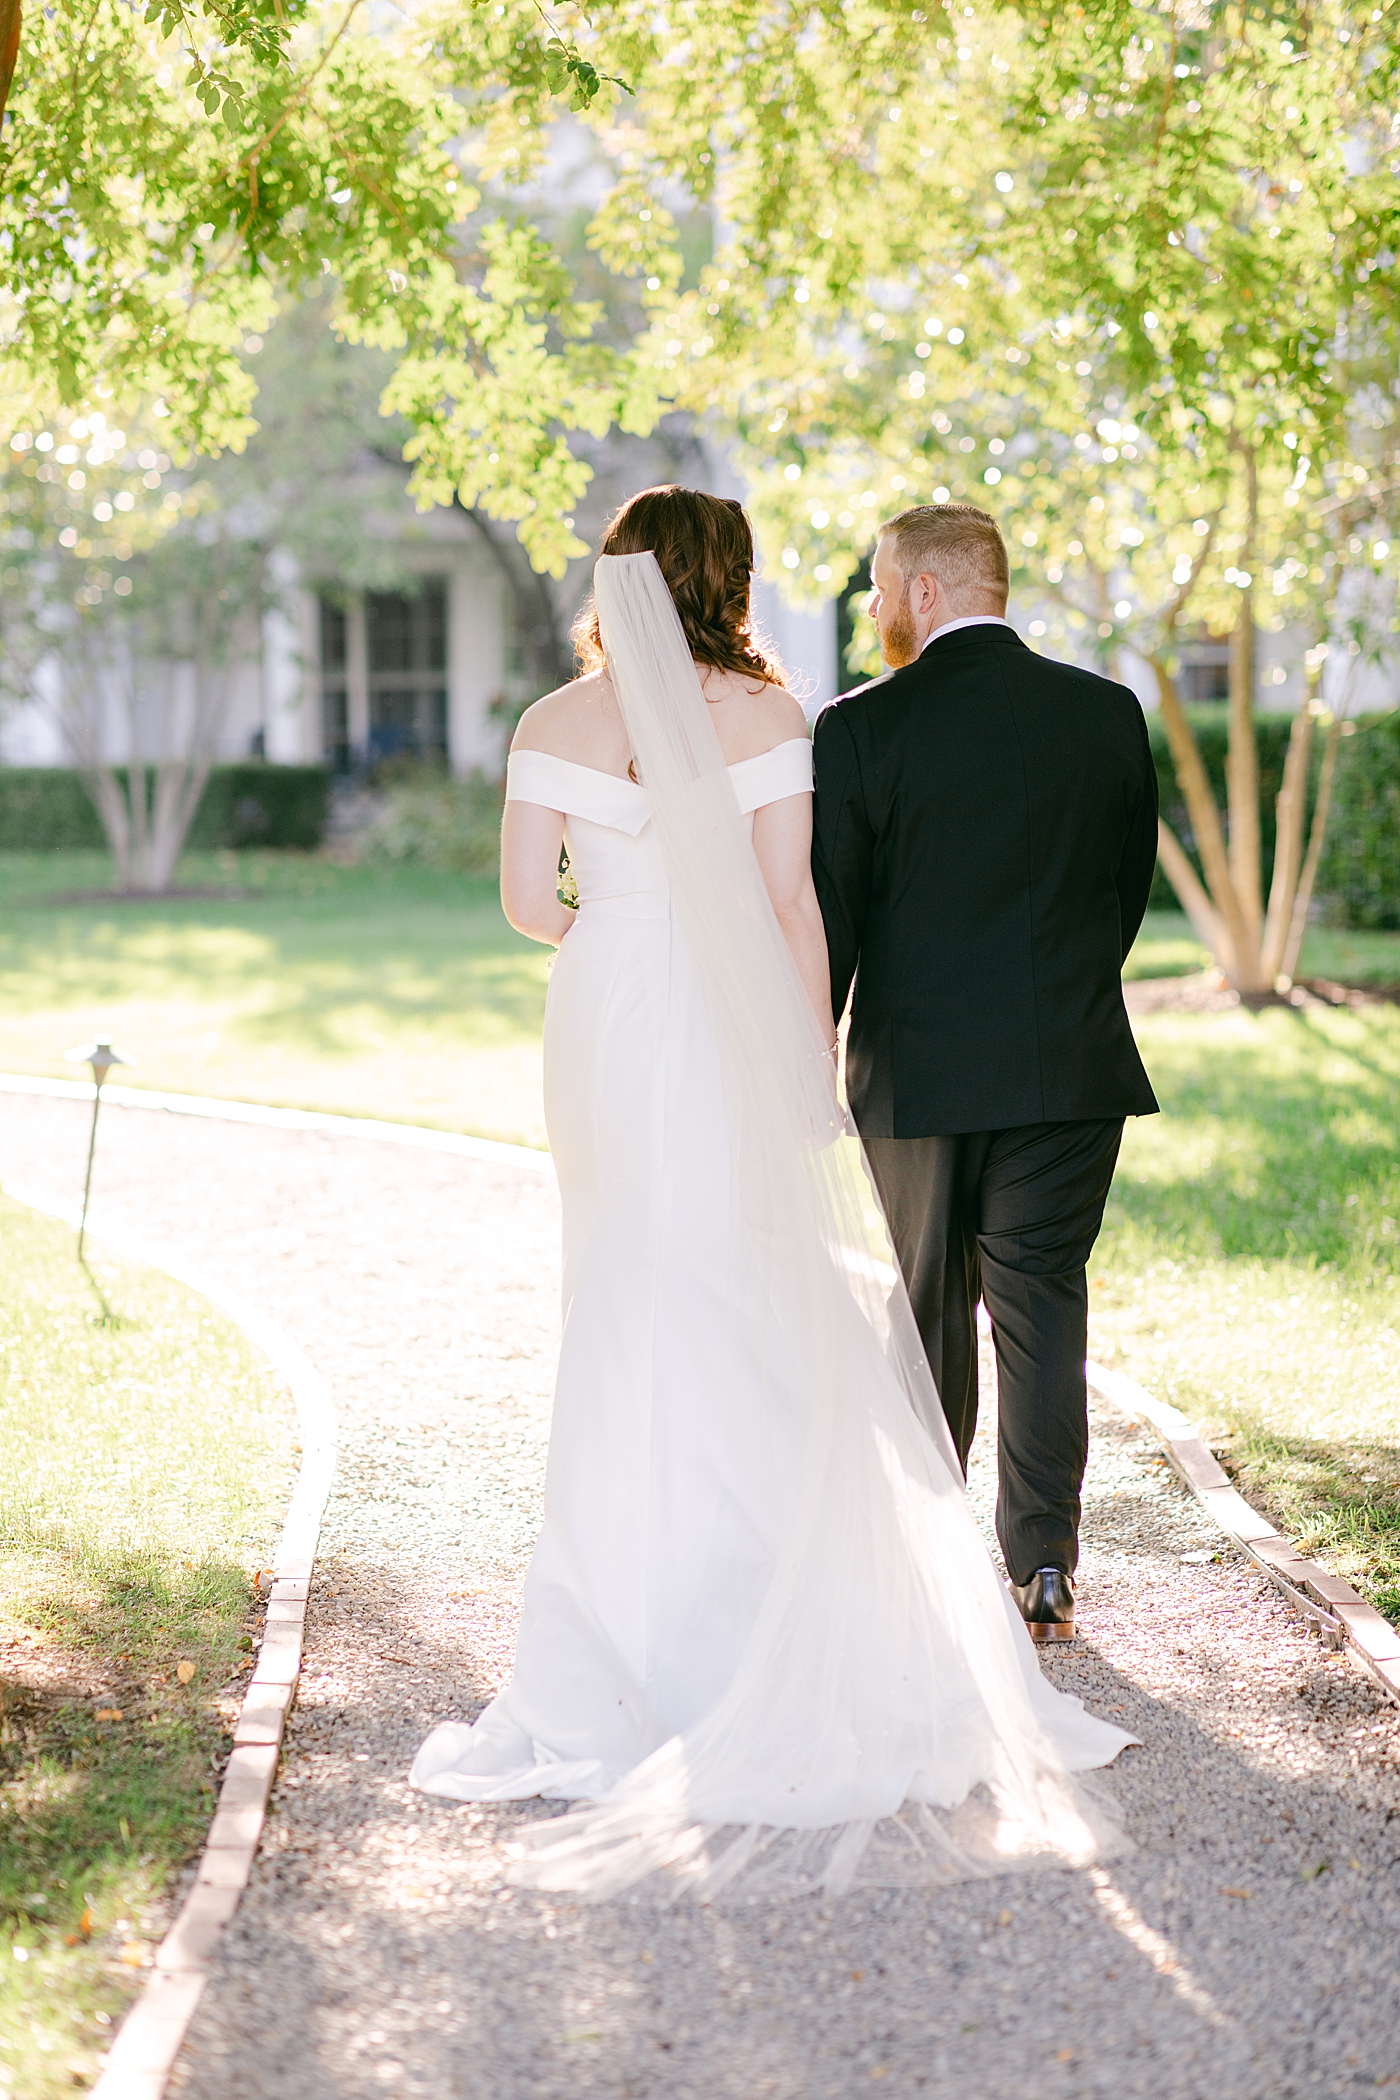 Bride and groom after their Inn at perry cabin wedding | Photo by Hope Helmuth Photography